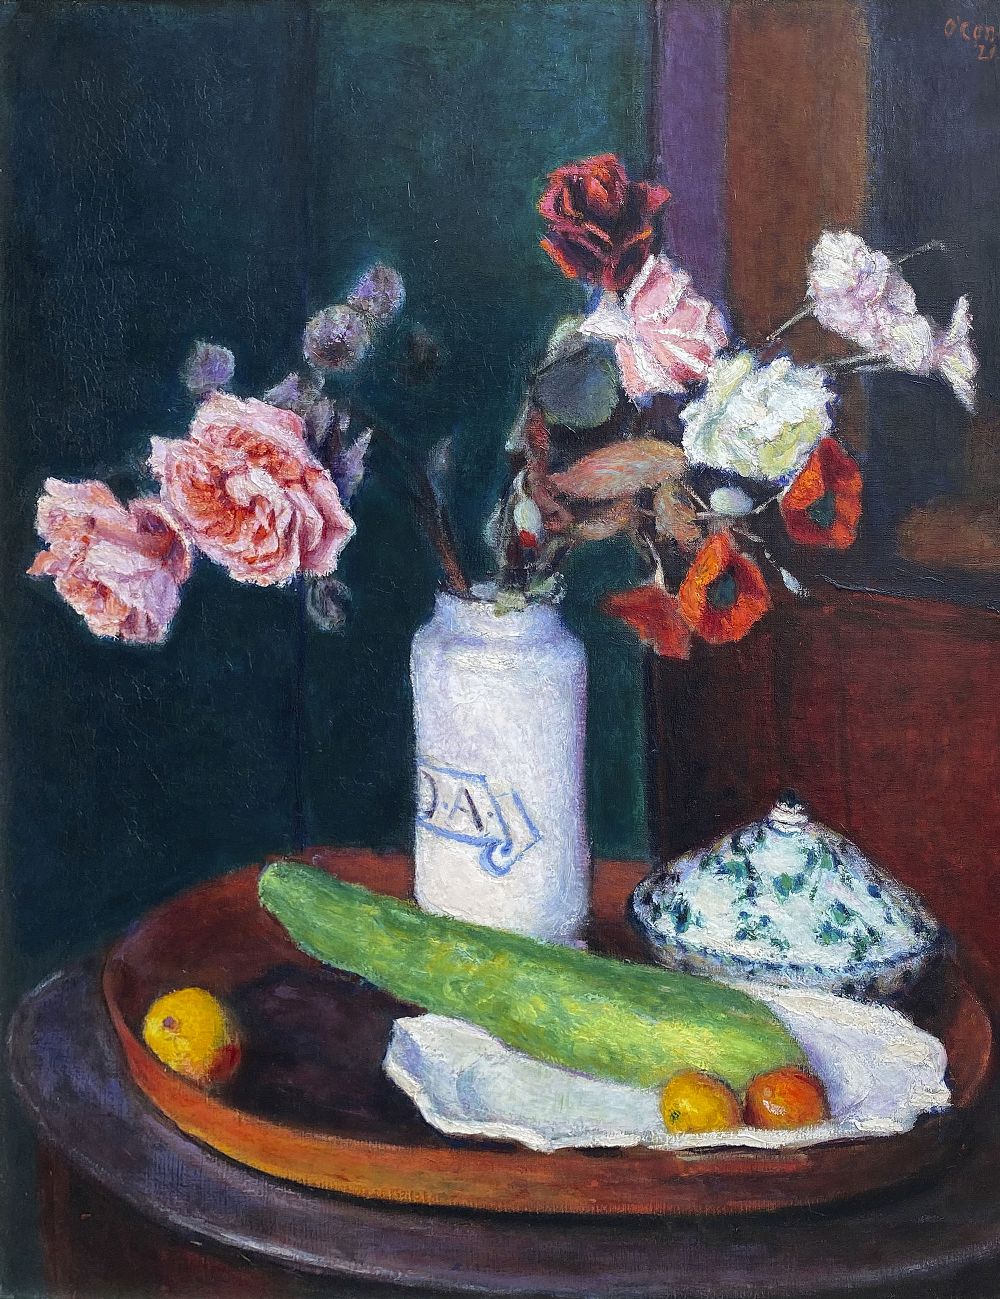 Lot 11 - NATURE MORTE by Roderic O'Conor